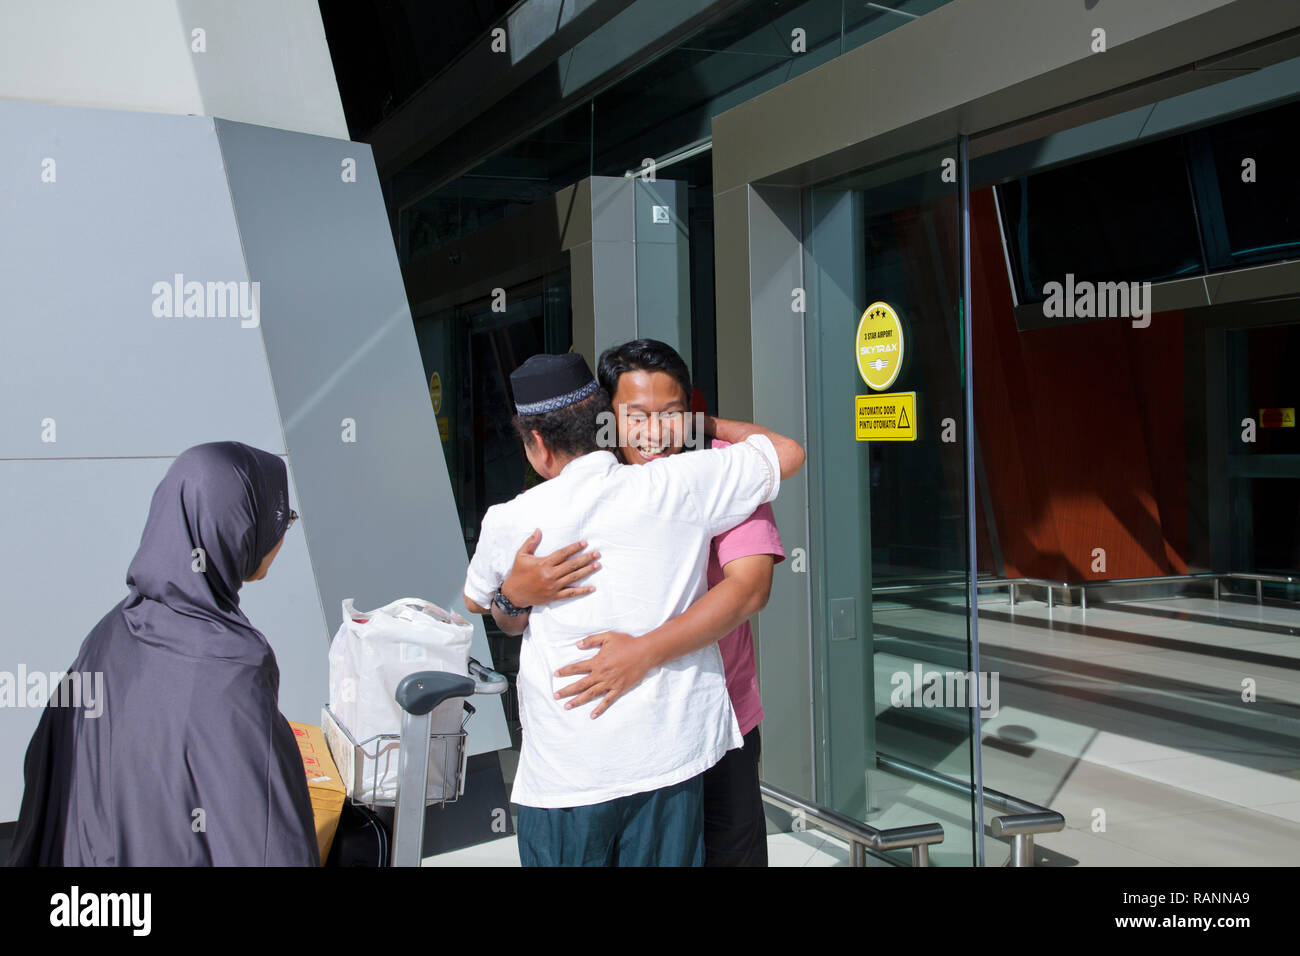 7.10, Arriving at Airport, Indonesianbook Stock Photo